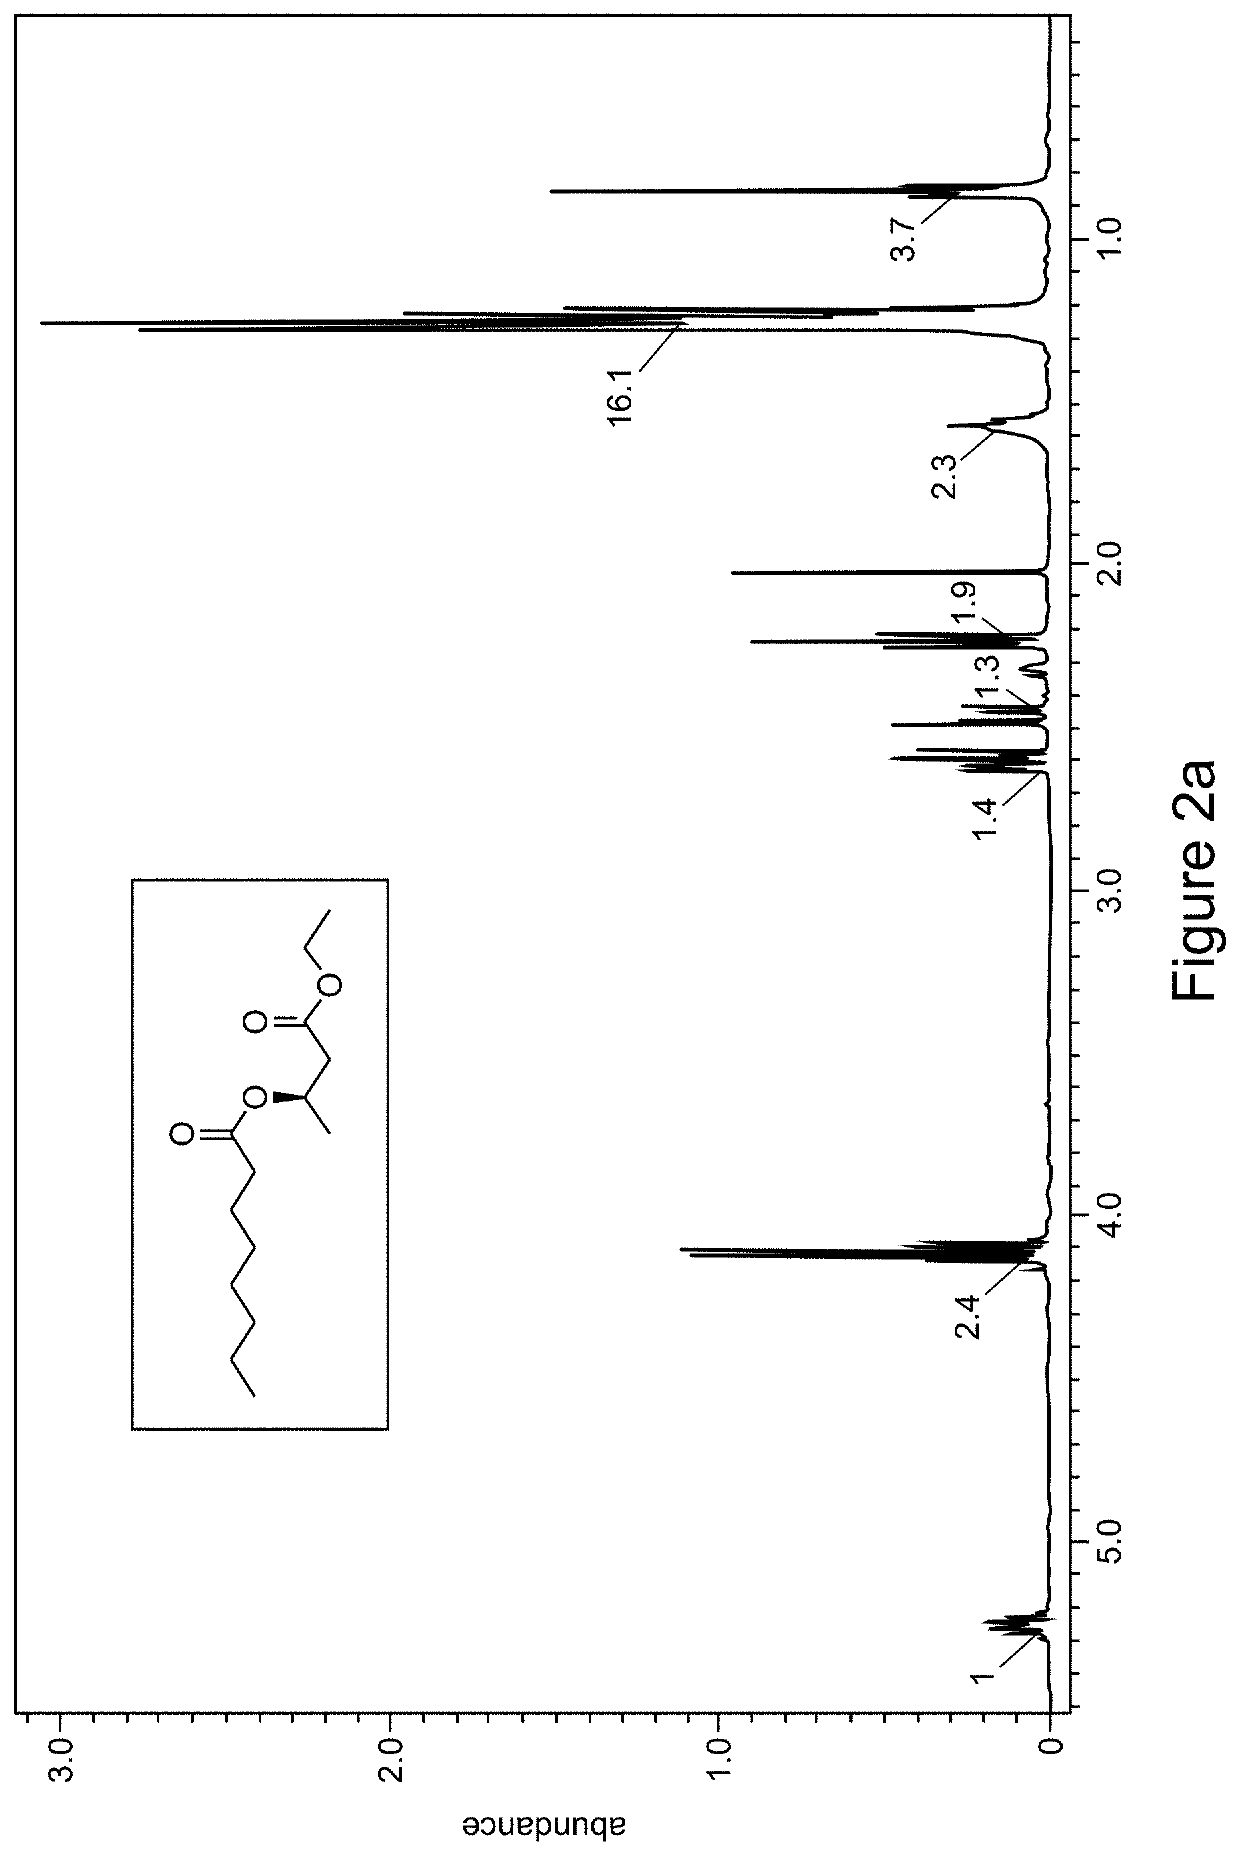 Medium chain fatty acid esters of beta-hydroxybutyrate and butanediol and compositions and methods for using same